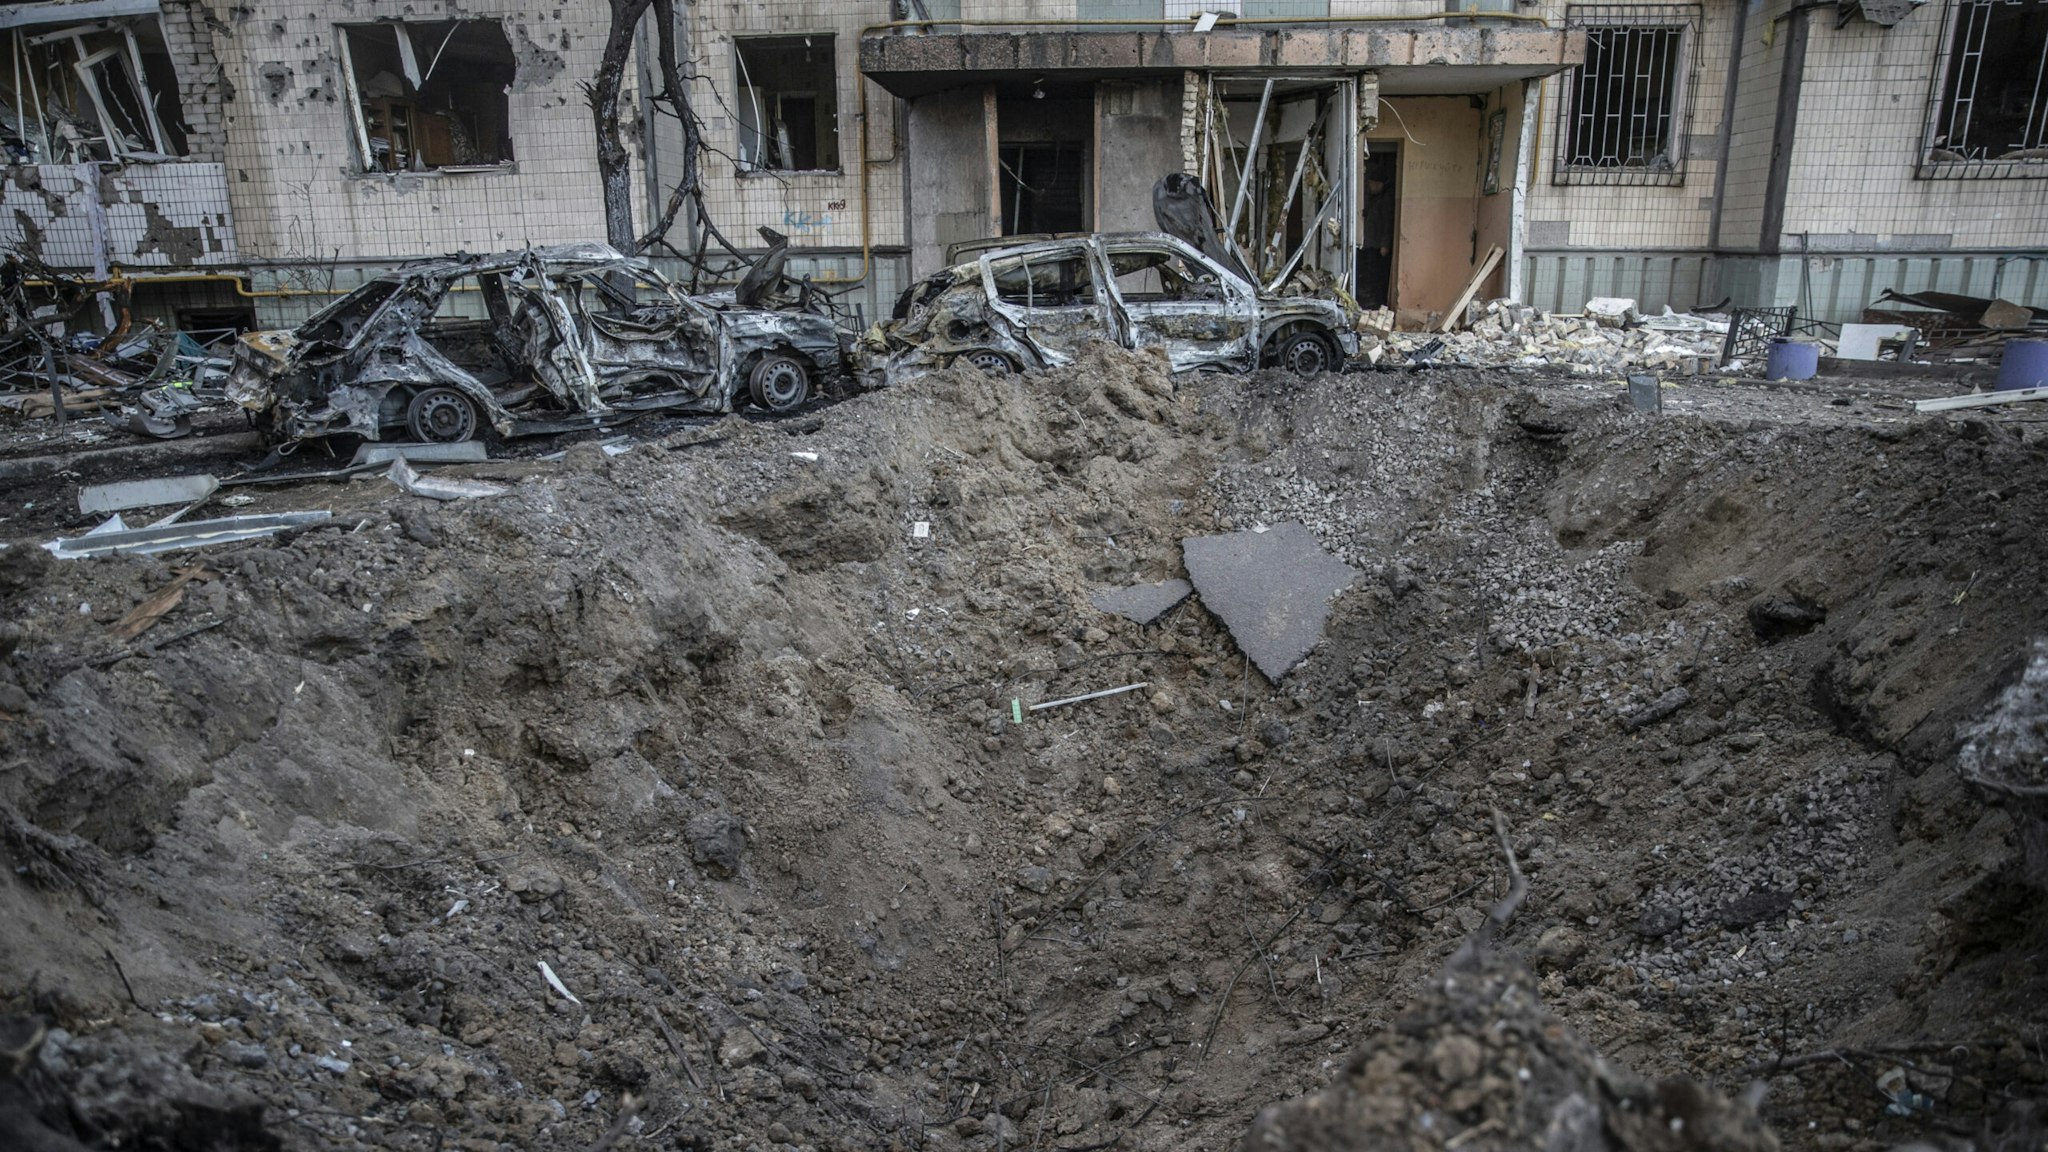 A view of civil settlement damaged by Russian shelling in Kyiv, Ukraine on March 20, 2022.